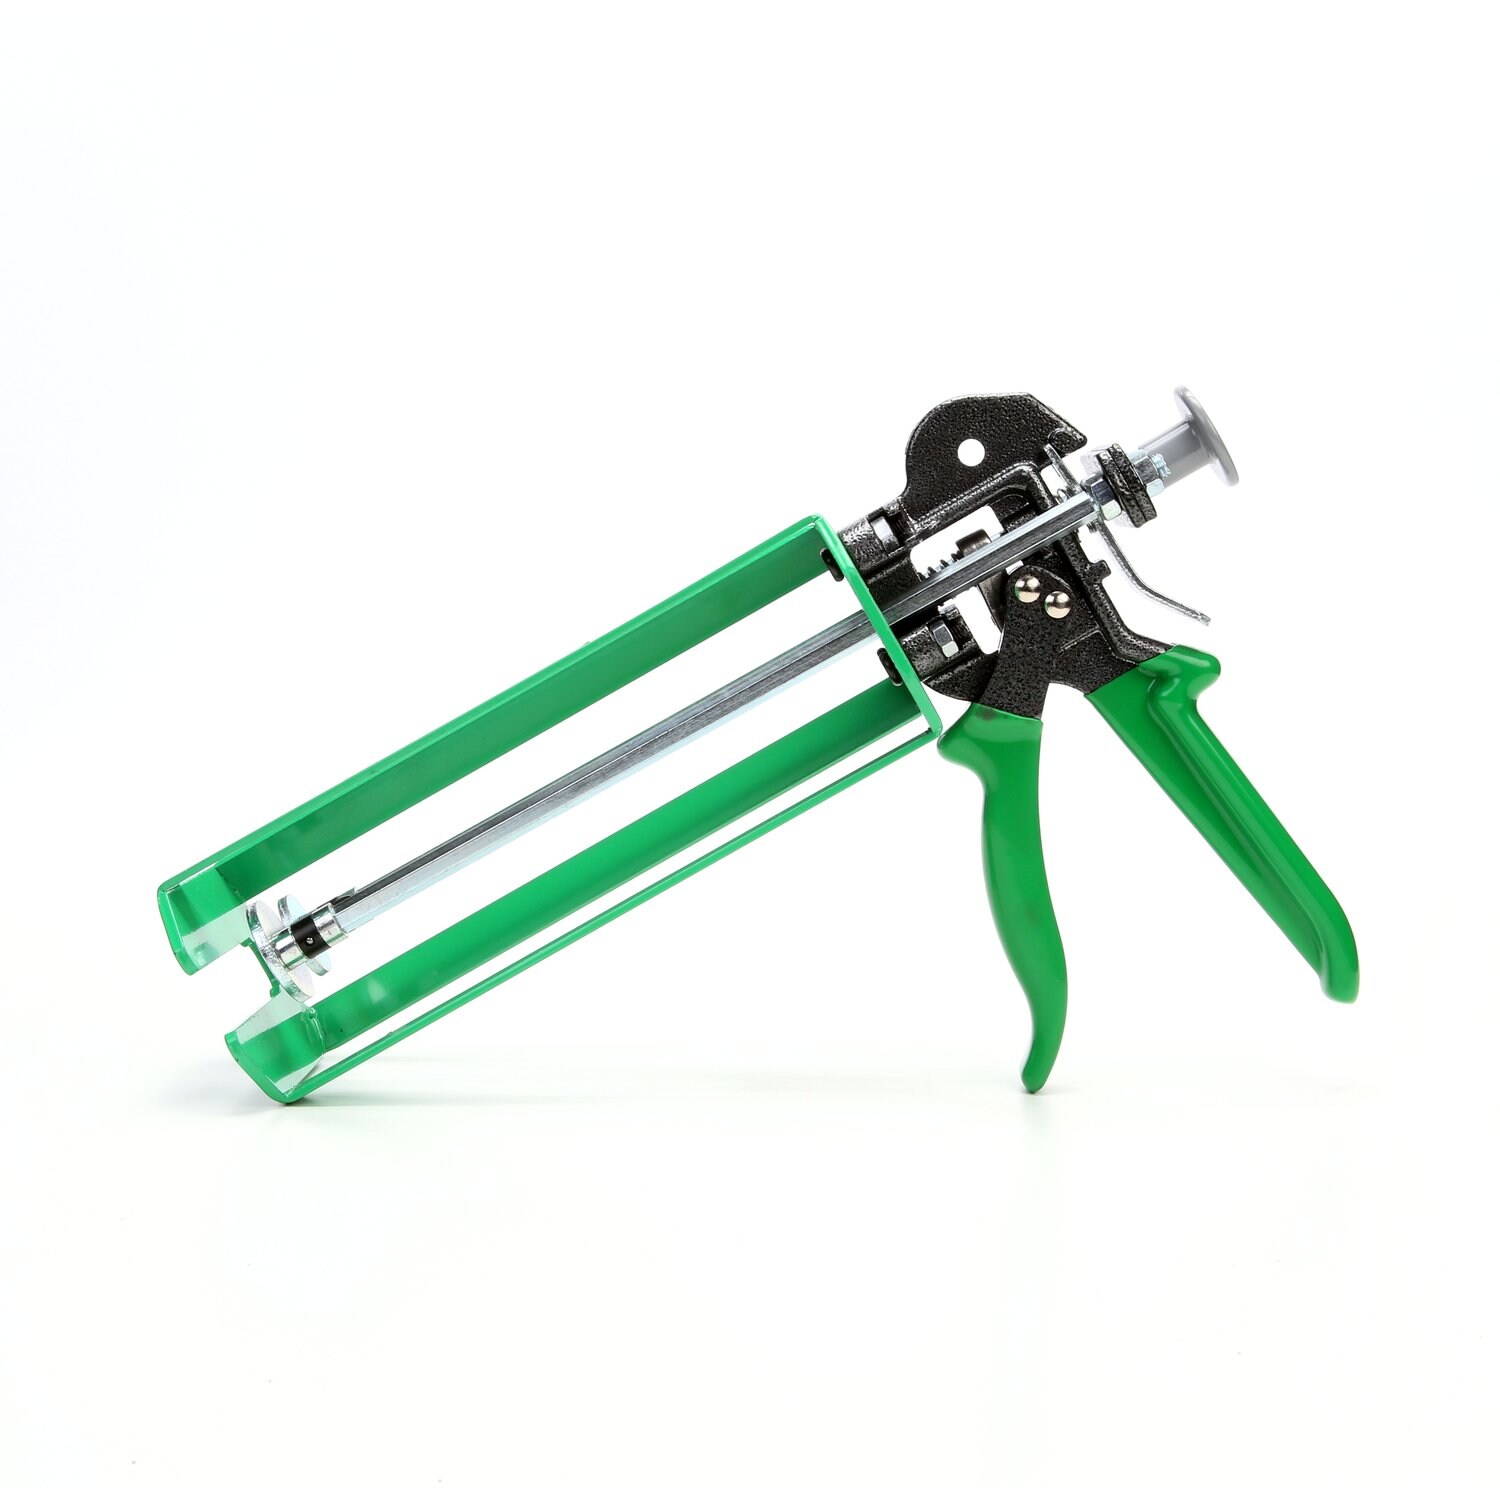 Cable Dispenser, Cable Reel Roller, Cable Caddy up to 510 mm / 20 in. Width